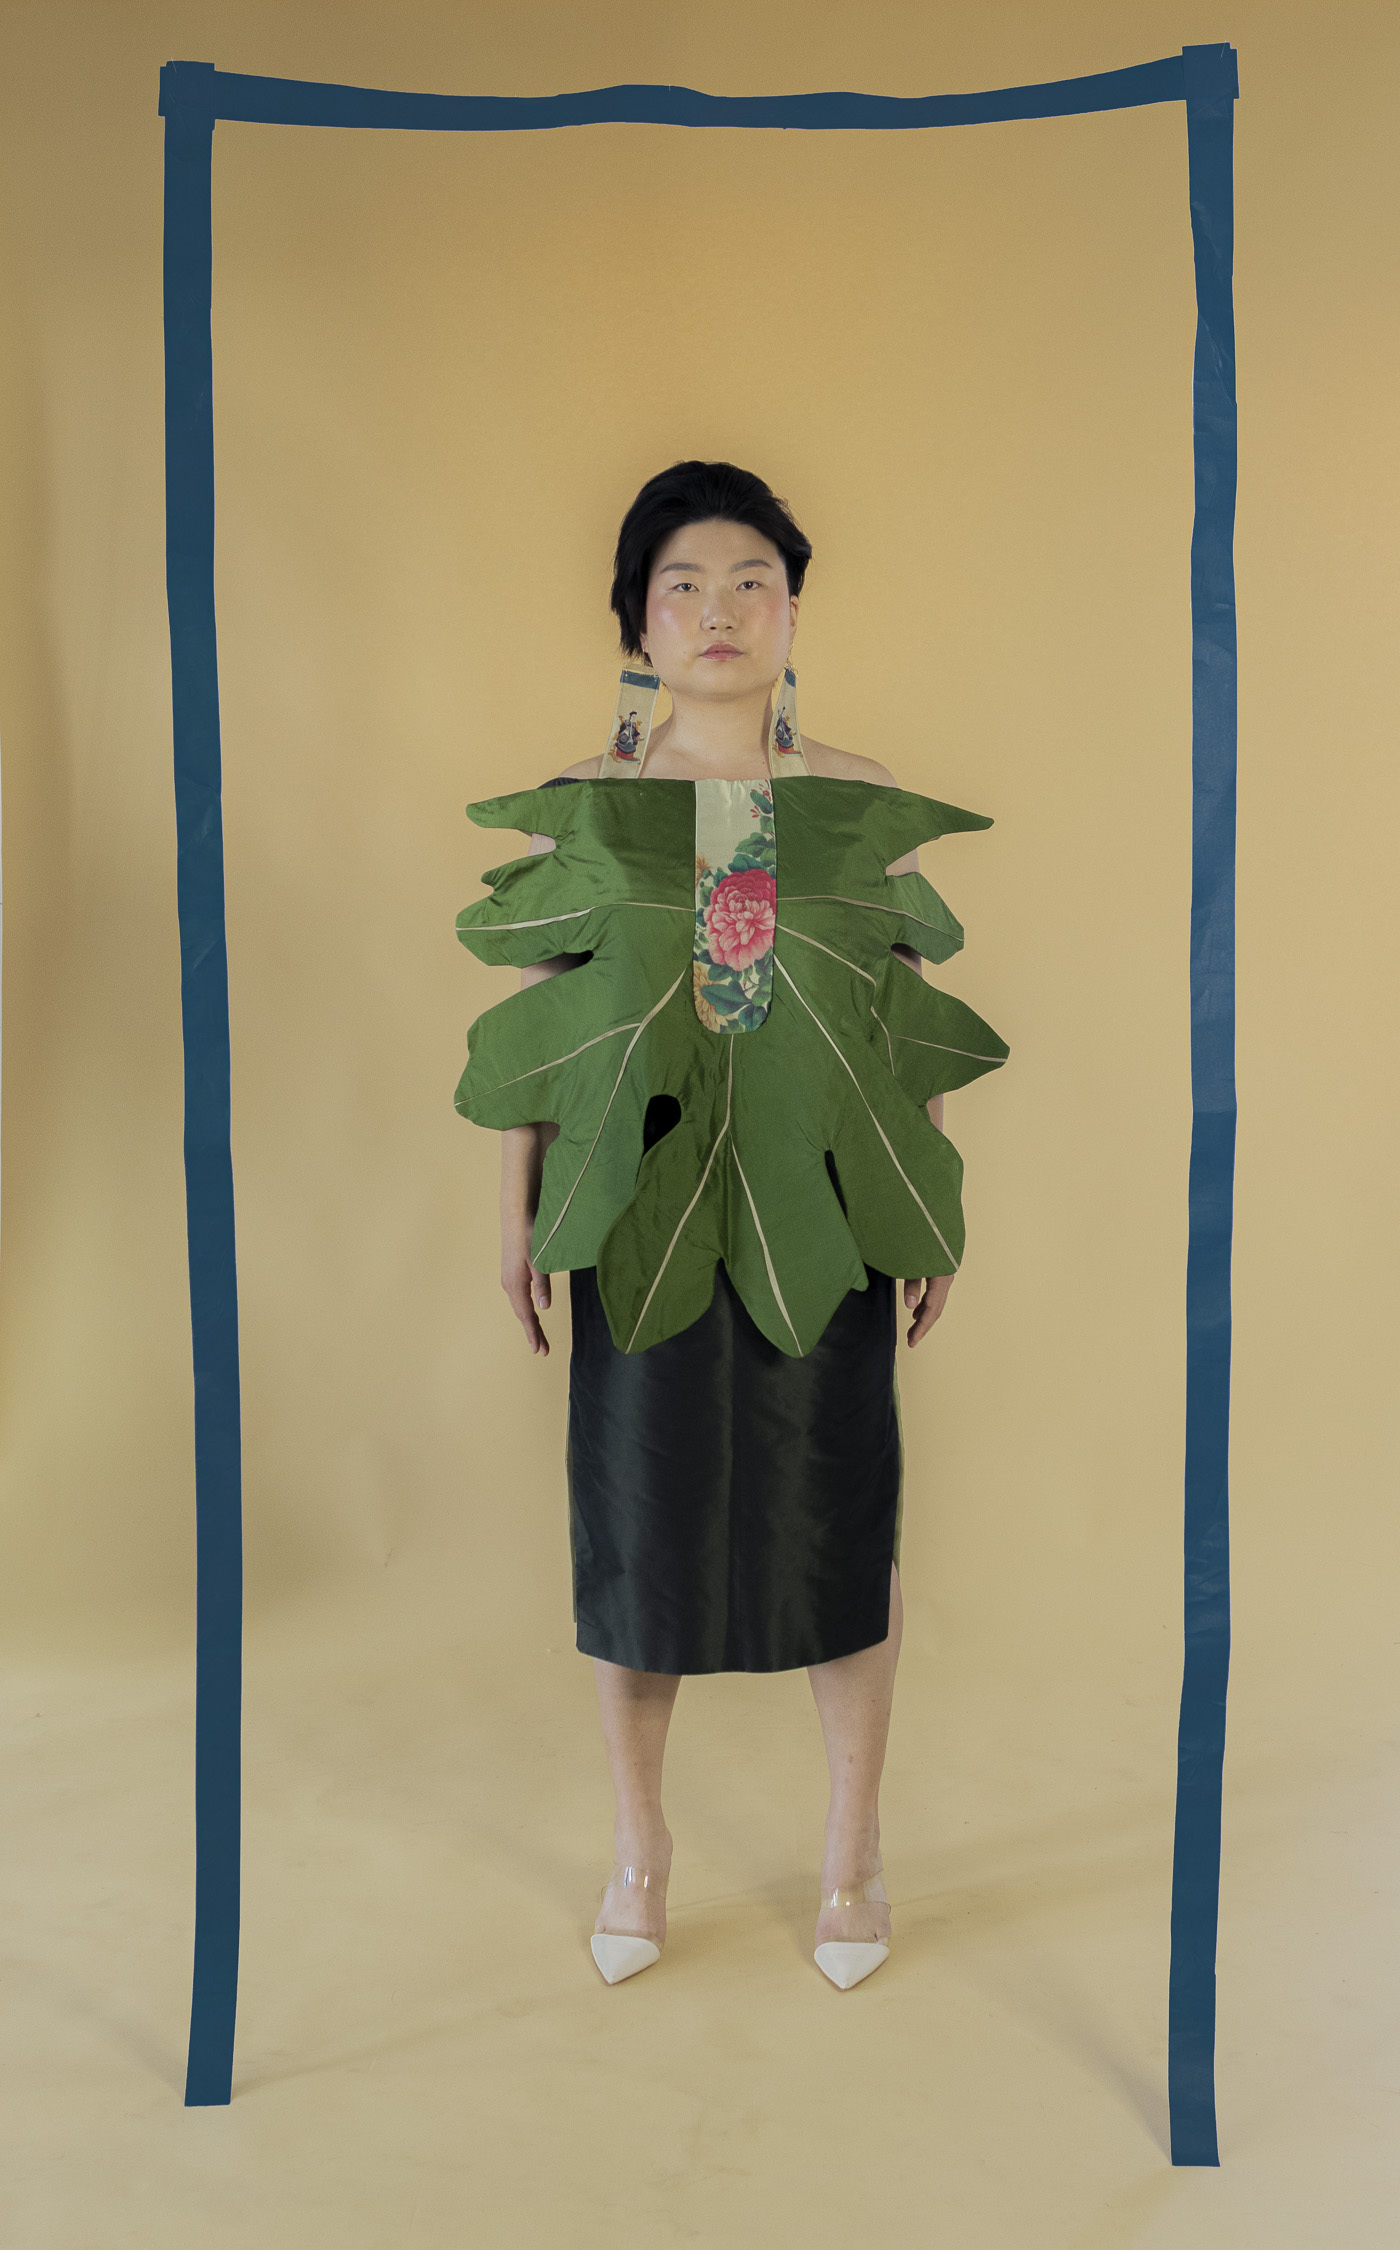 Dahn Bi stands wearing a leaf inspired green dress. They are framed with hanging blue tape